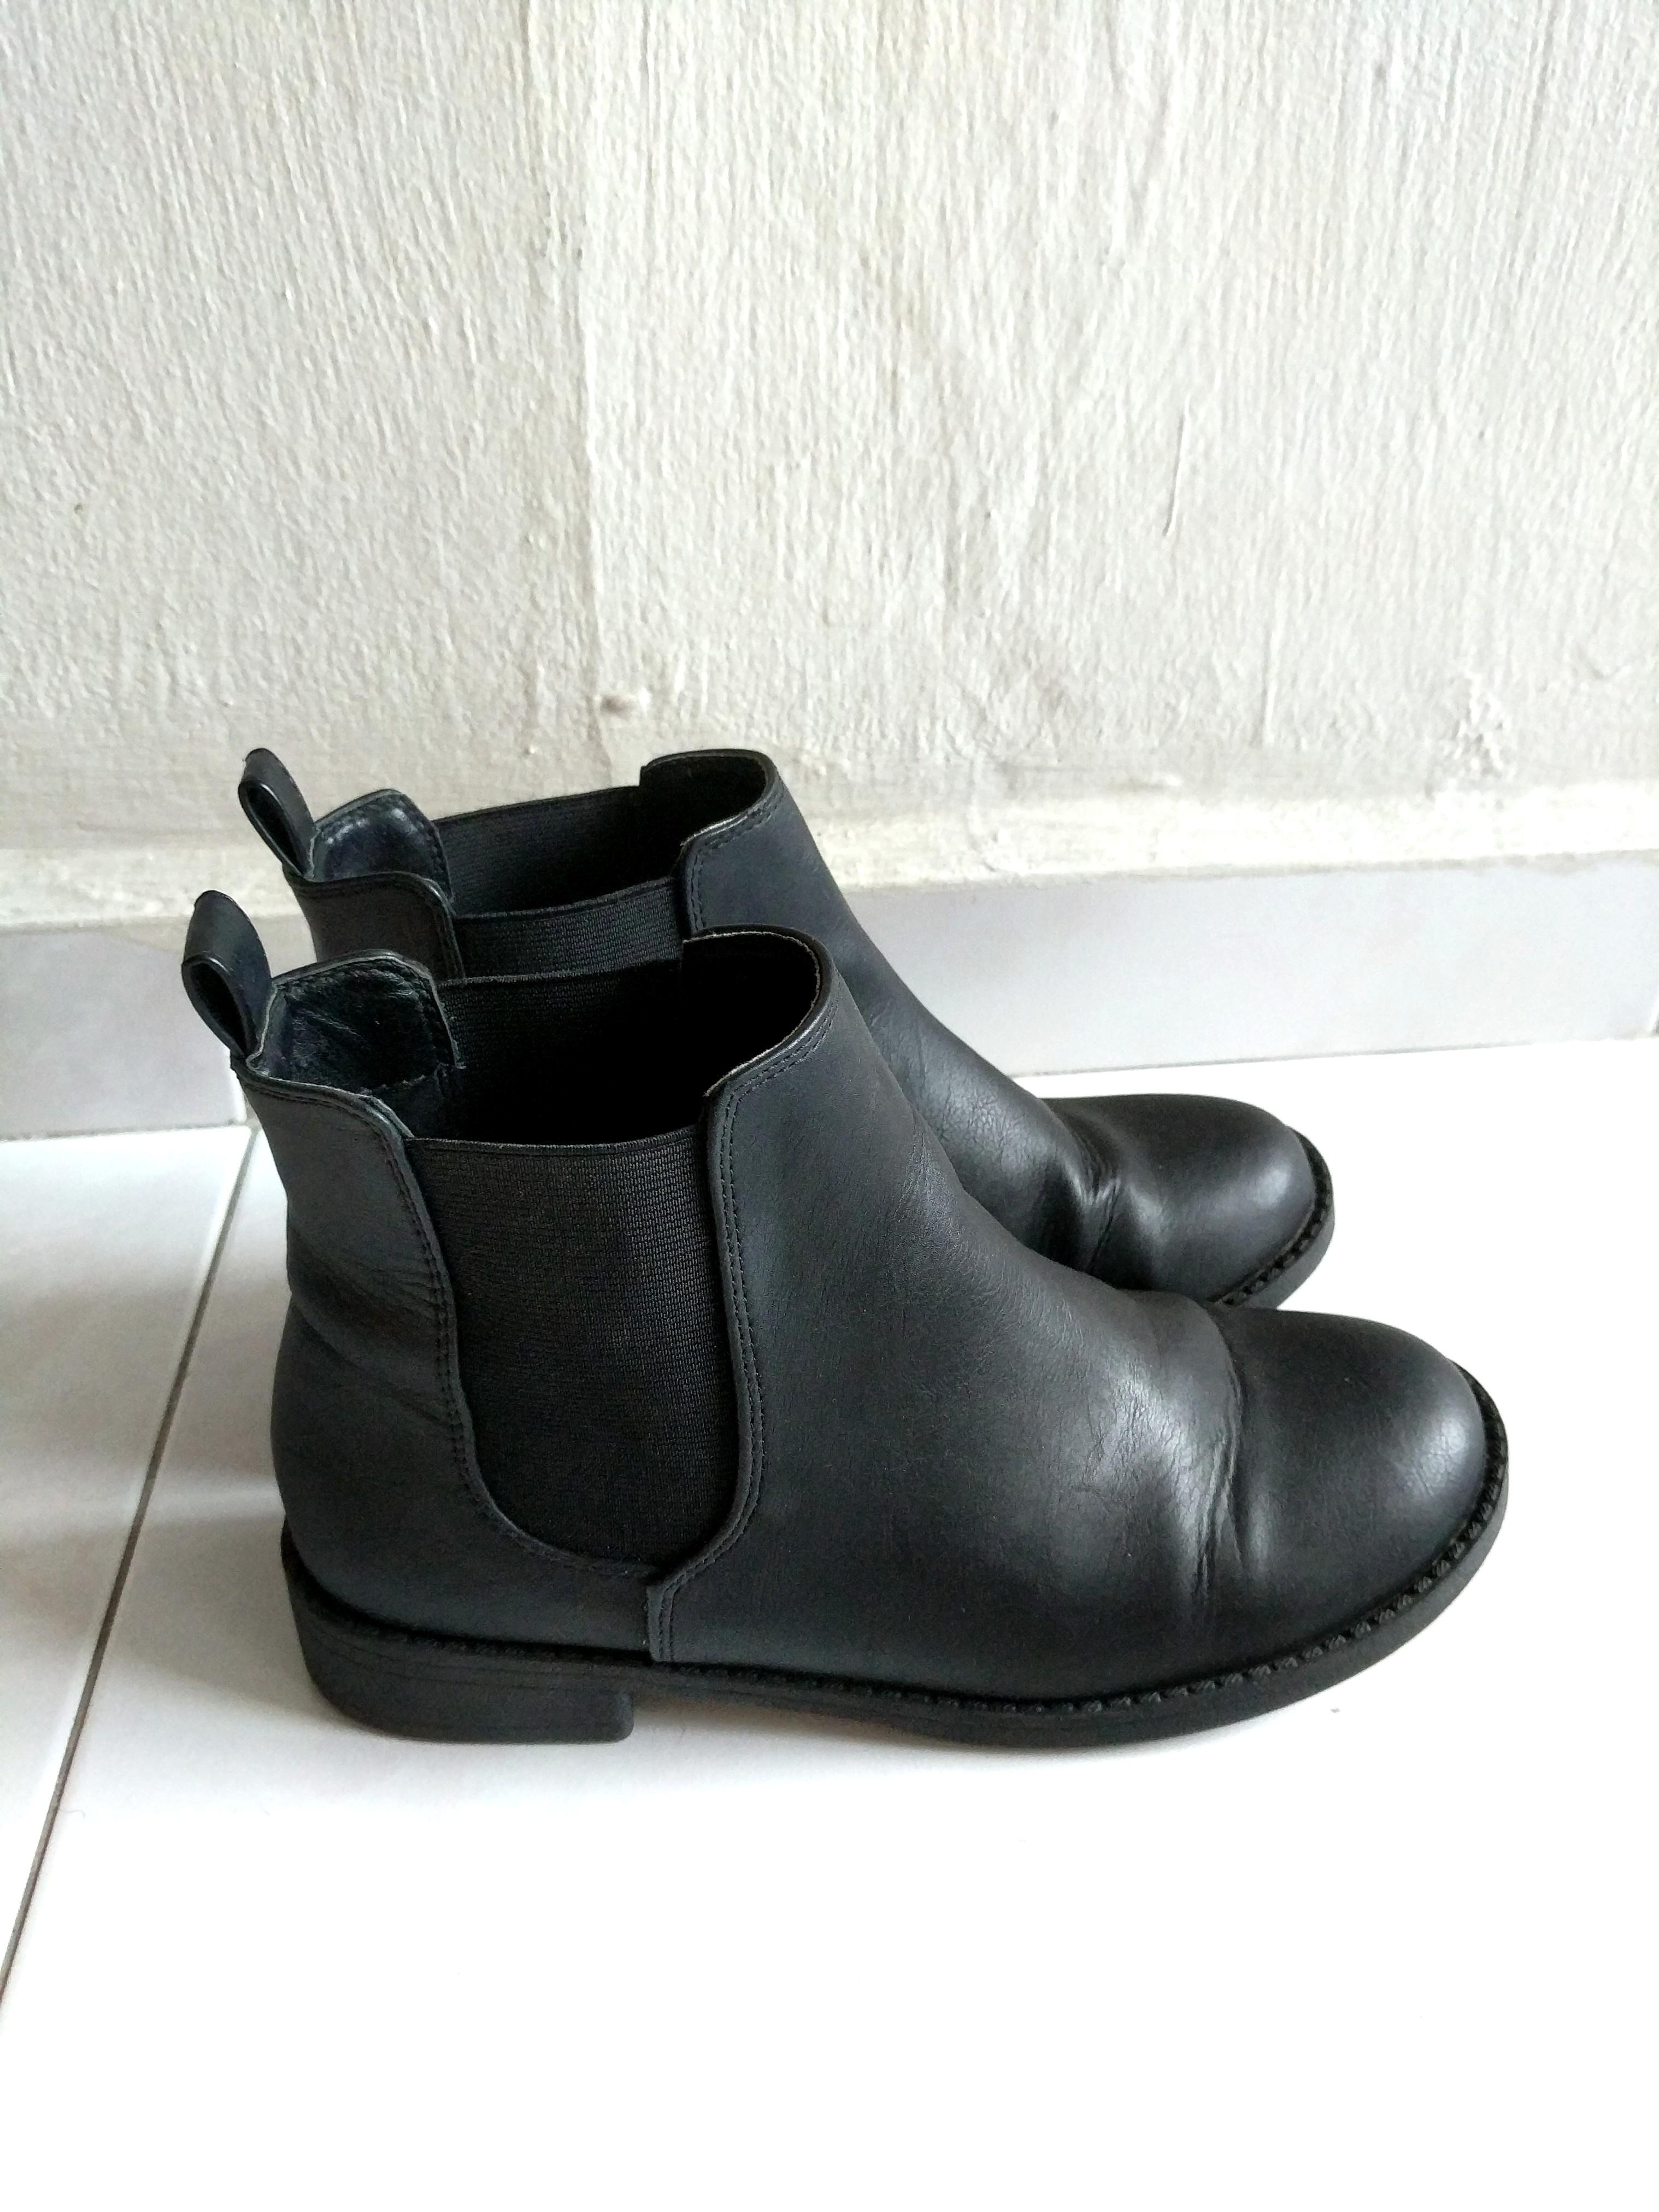 chelsea boots h&m philippines